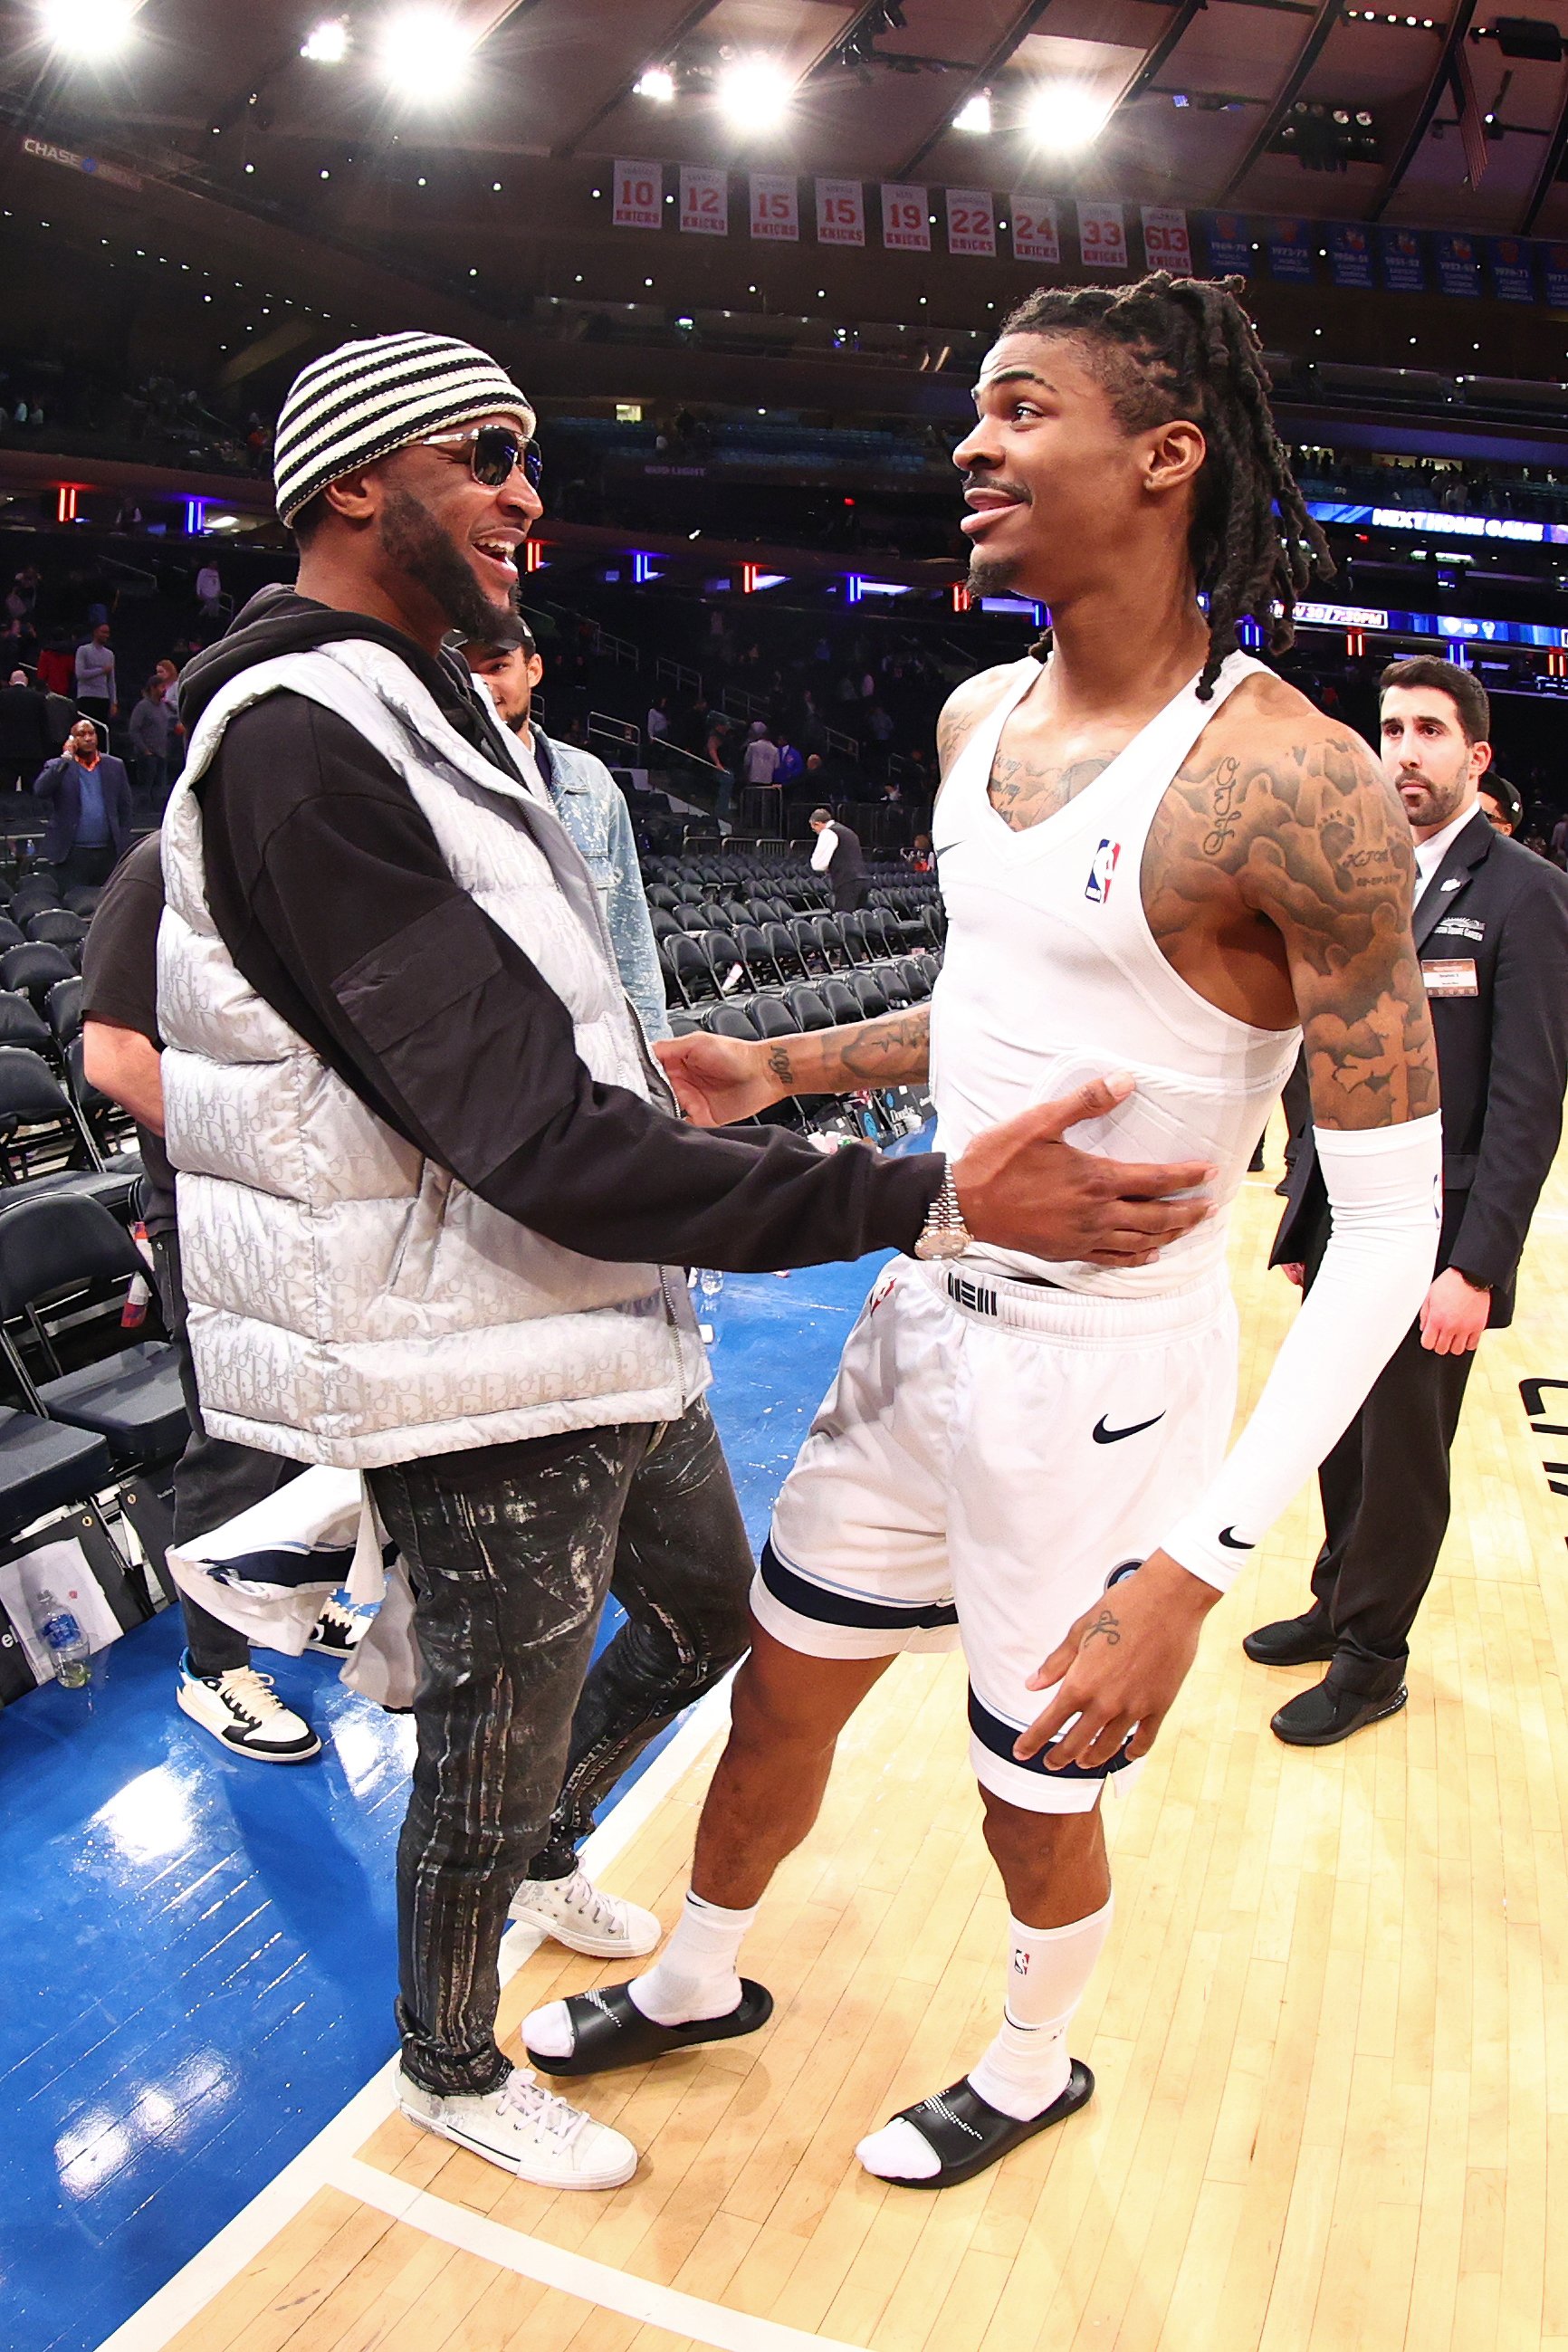 Ja Morant and Tee Morant, at a Grizzlies VS New York Knicks game on November 27, 2022, at Madison Square Garden in New York City, New York. | Source: Getty Images